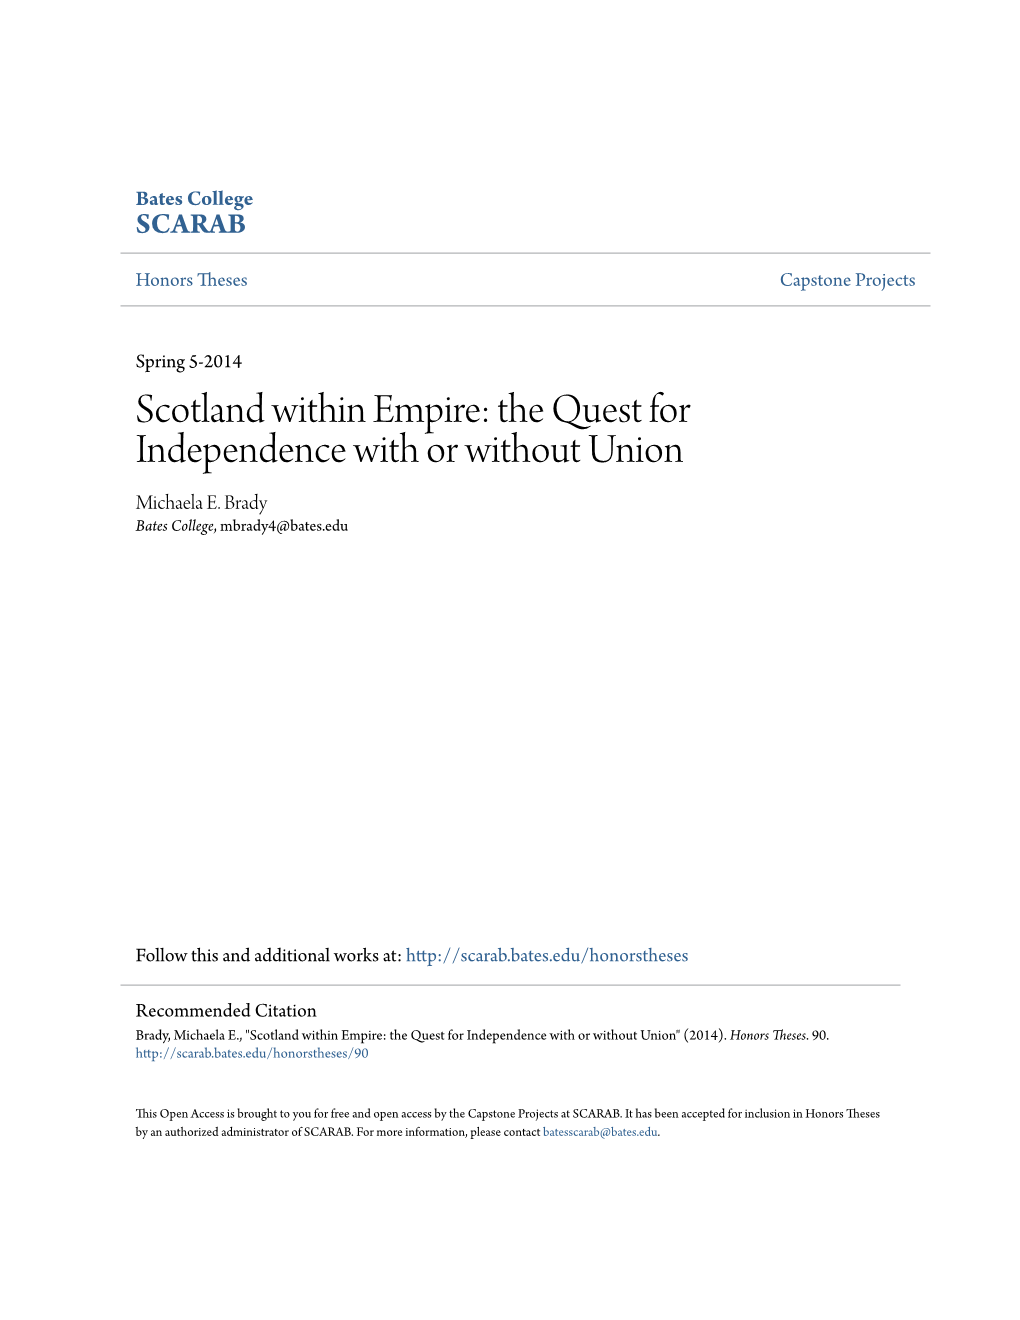 Scotland Within Empire: the Quest for Independence with Or Without Union Michaela E